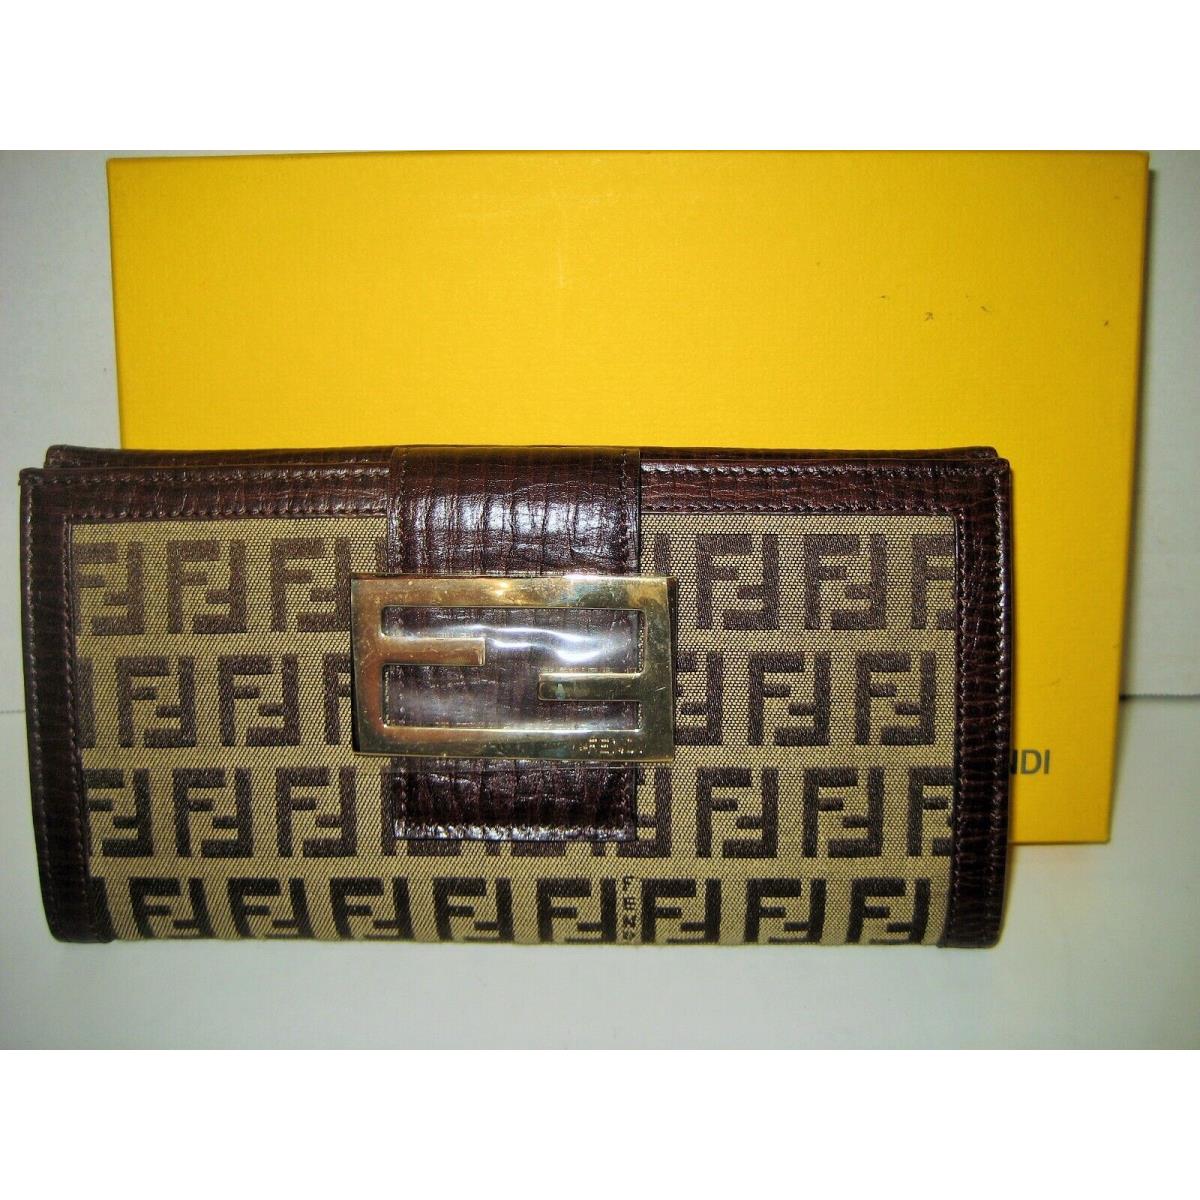 Fendi Brown FF Large Logo Leather Continental Credit Card Case Wallet Clutch